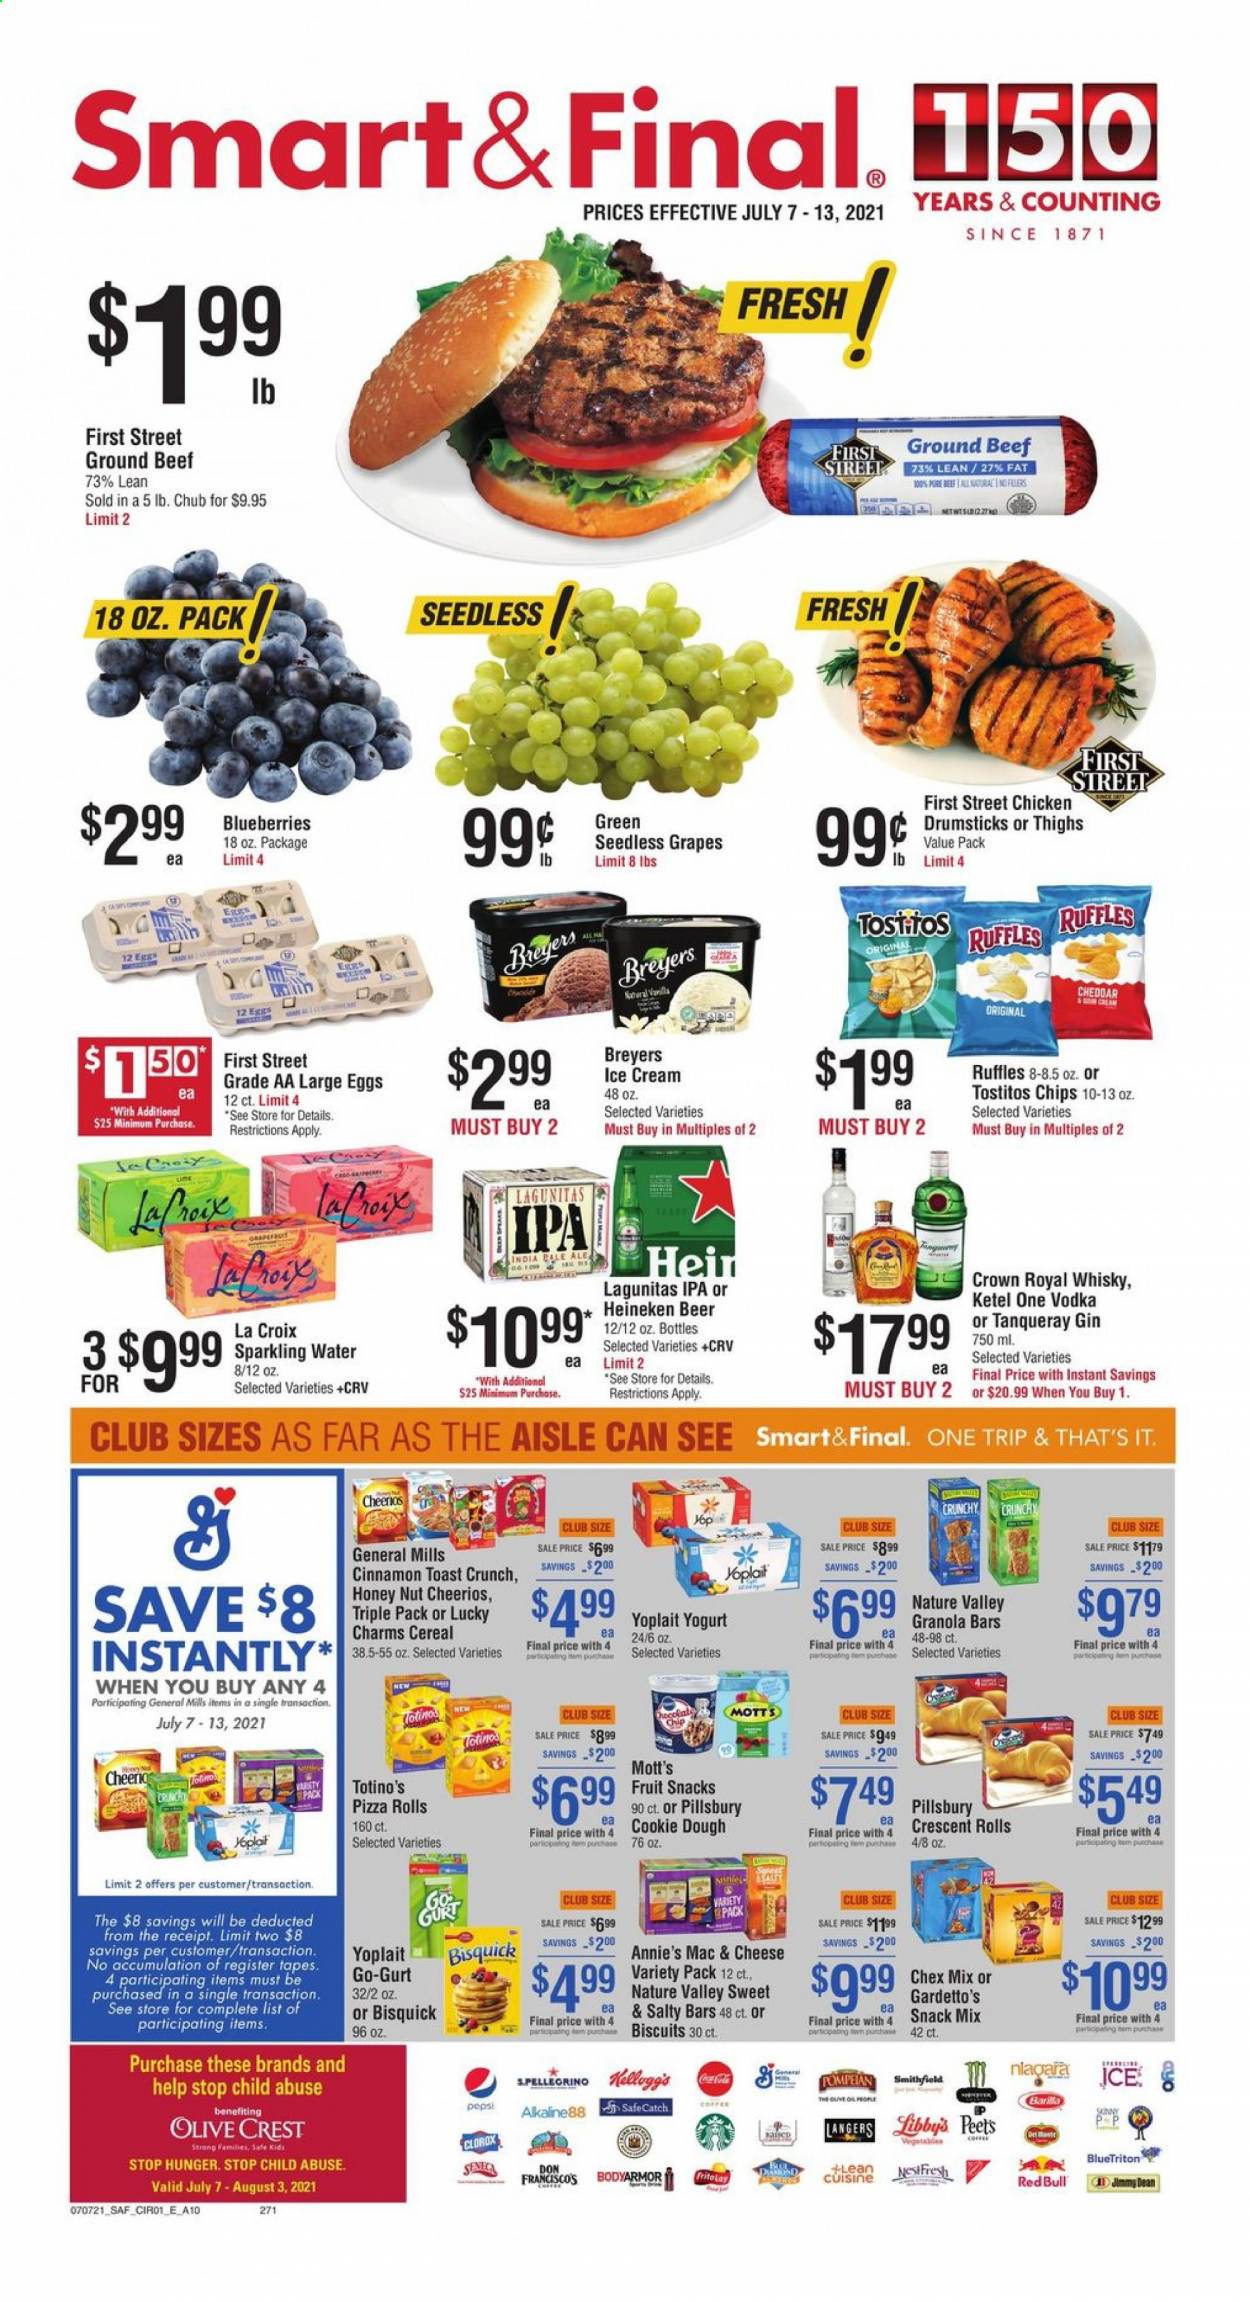 thumbnail - Smart & Final Flyer - 07/07/2021 - 07/13/2021 - Sales products - seedless grapes, pizza rolls, crescent rolls, blueberries, grapes, Mott's, pizza, Pillsbury, Barilla, Lean Cuisine, Annie's, Jimmy Dean, yoghurt, Yoplait, large eggs, ice cream, cookie dough, Kellogg's, biscuit, fruit snack, chips, Frito-Lay, Ruffles, Tostitos, Chex Mix, Bisquick, cereals, Cheerios, granola bar, Nature Valley, cinnamon, Coca-Cola, Pepsi, sparkling water, San Pellegrino, coffee, gin, vodka, whisky, beer, Heineken, IPA, chicken drumsticks, beef meat, ground beef. Page 1.